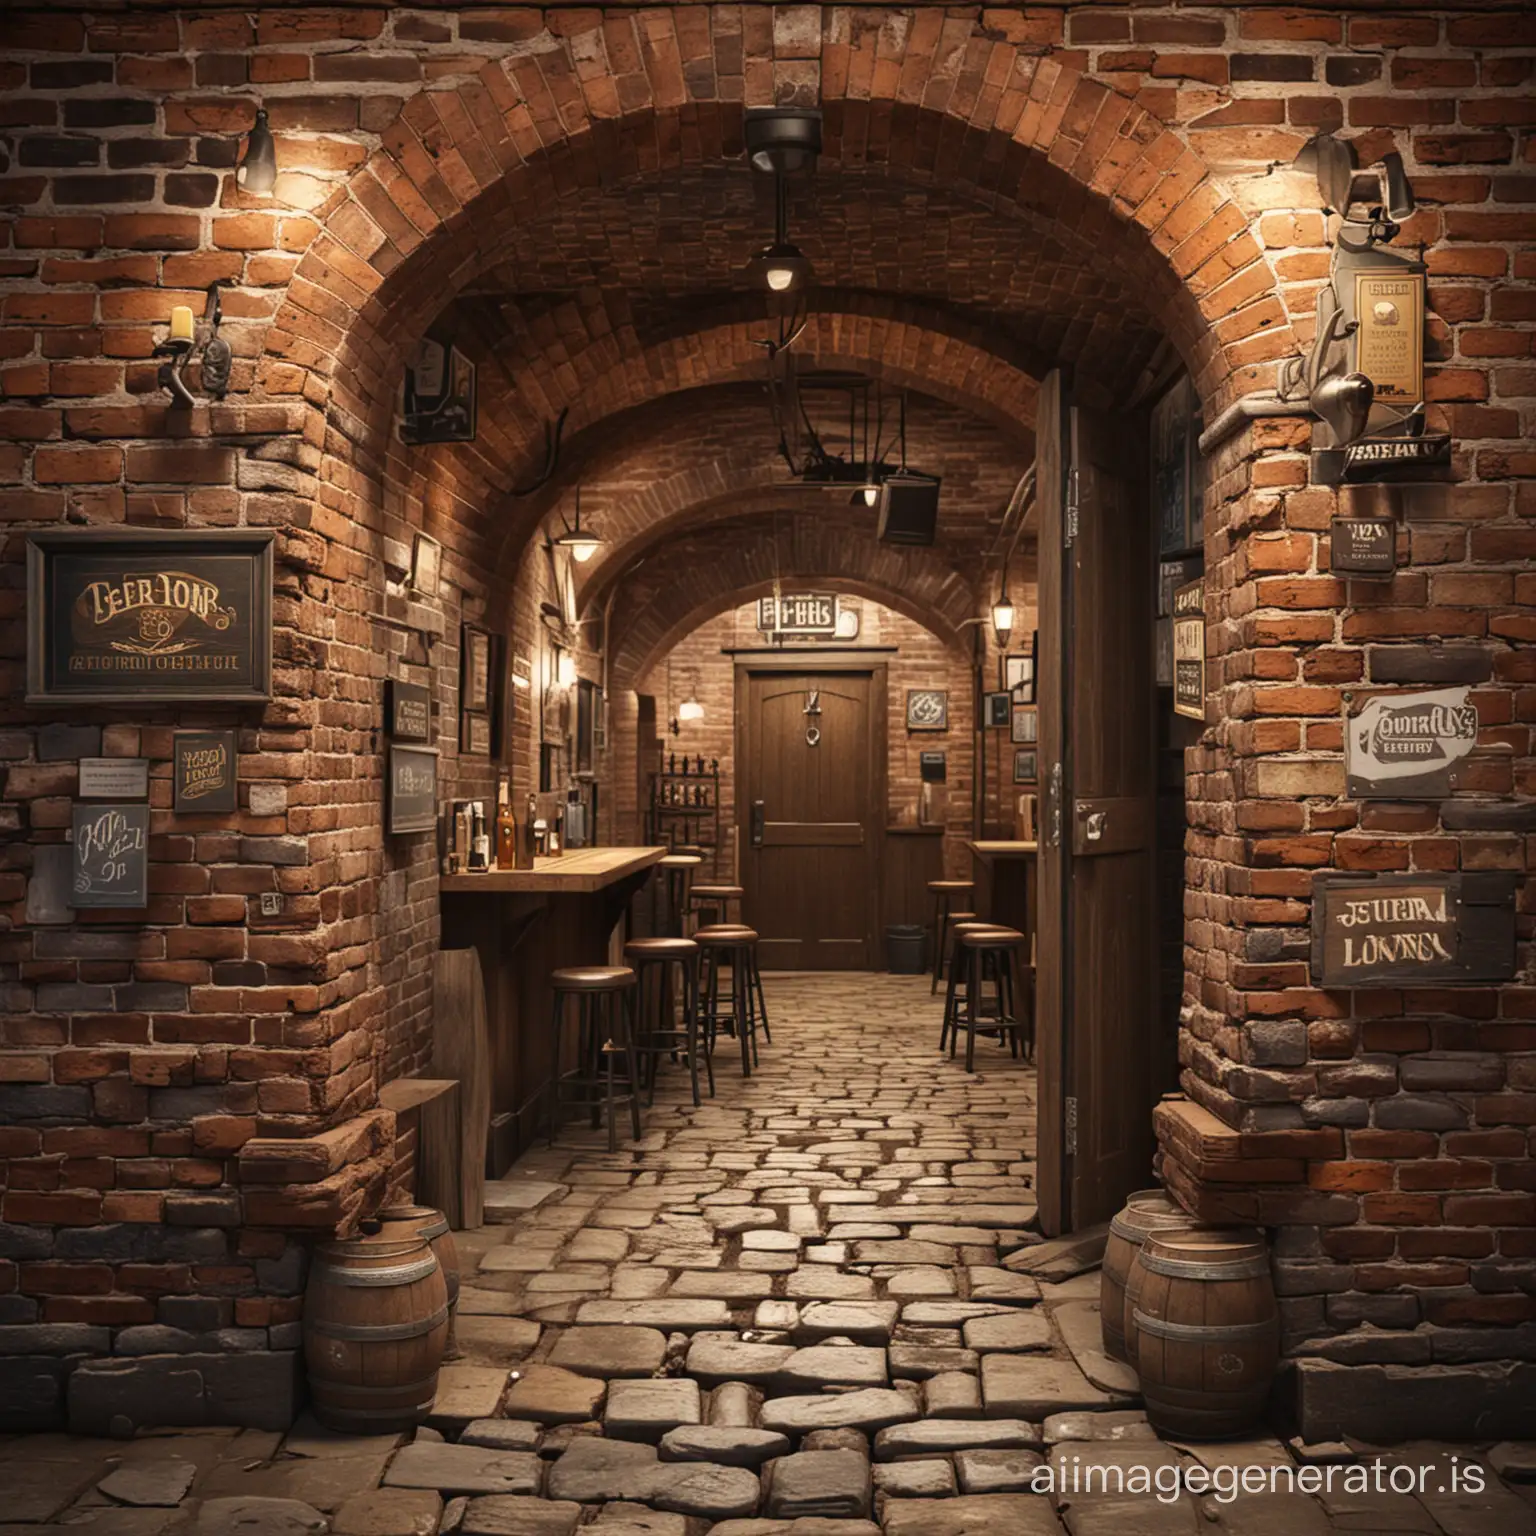 3D-Design-of-a-Vintage-London-Pub-Scene-with-Beer-Pumps-and-Customers